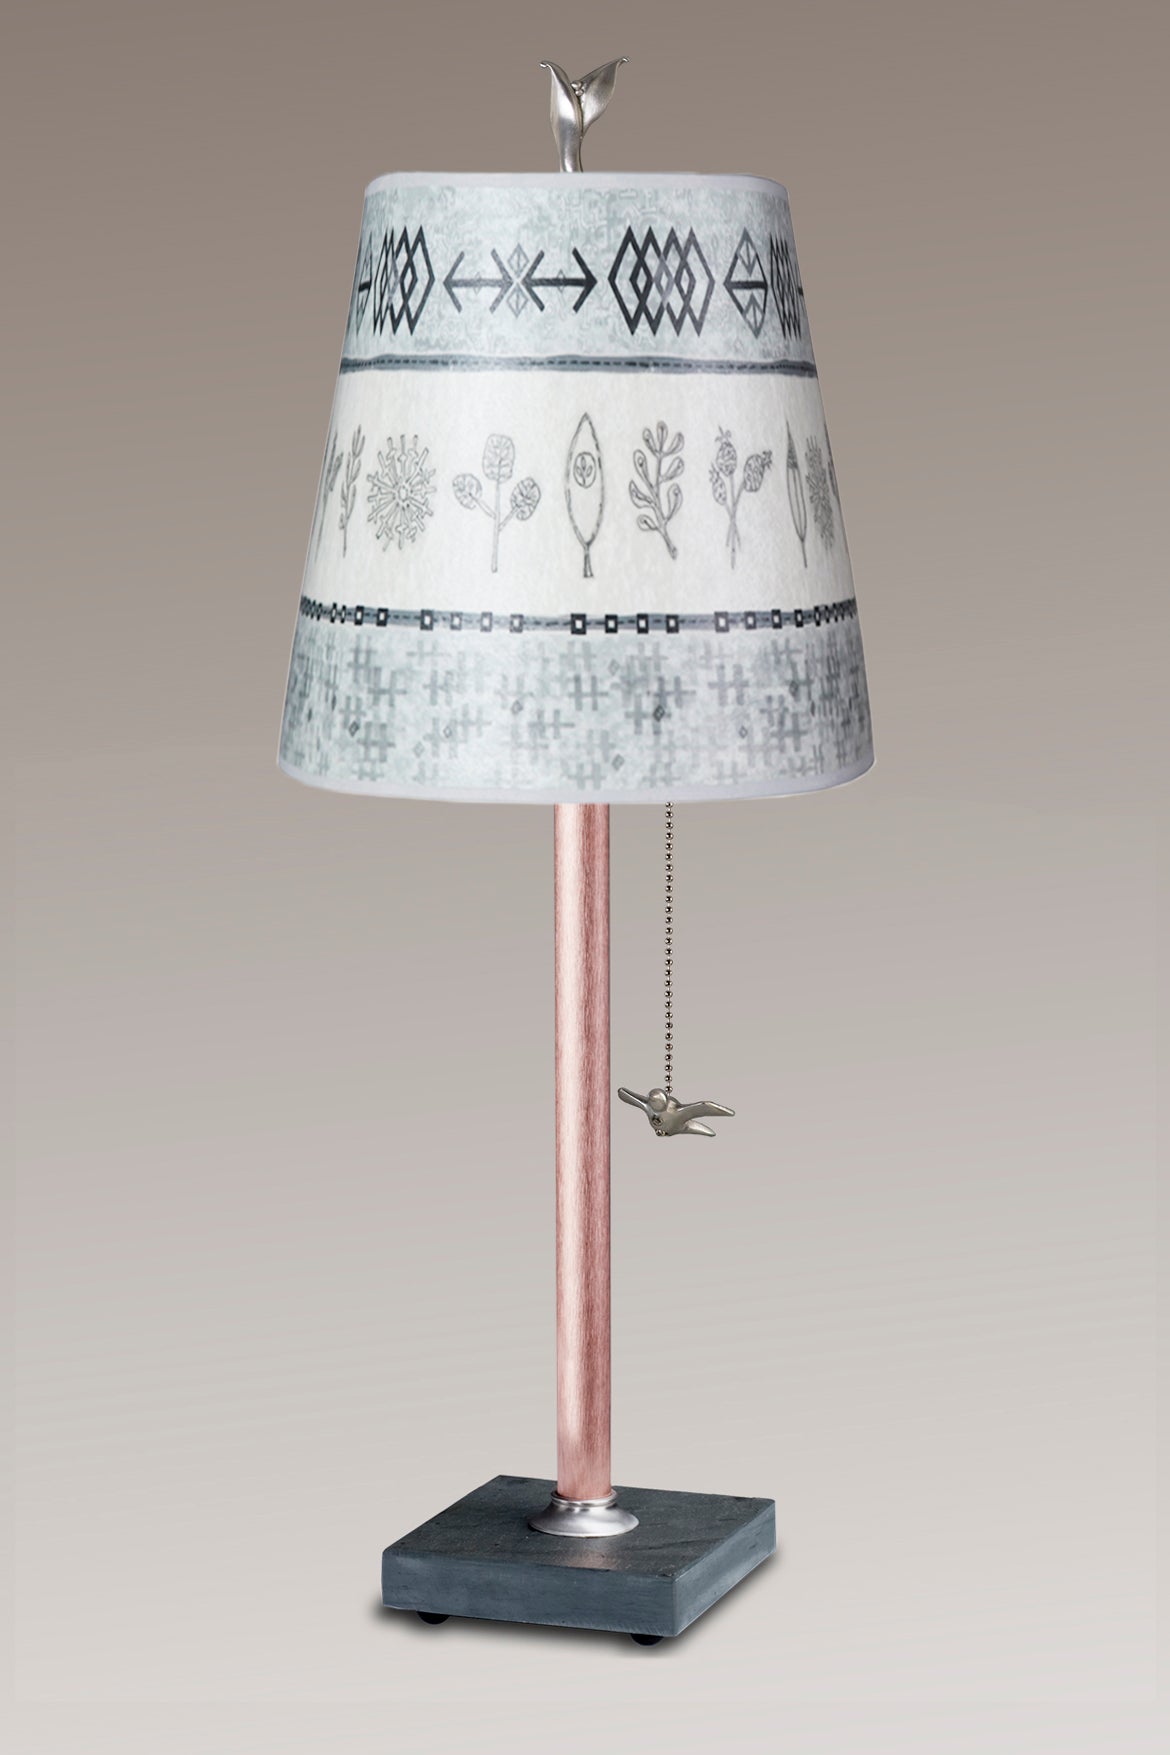 Janna Ugone & Co Table Lamps Copper Table Lamp with Small Drum in Woven & Sprig in Mist